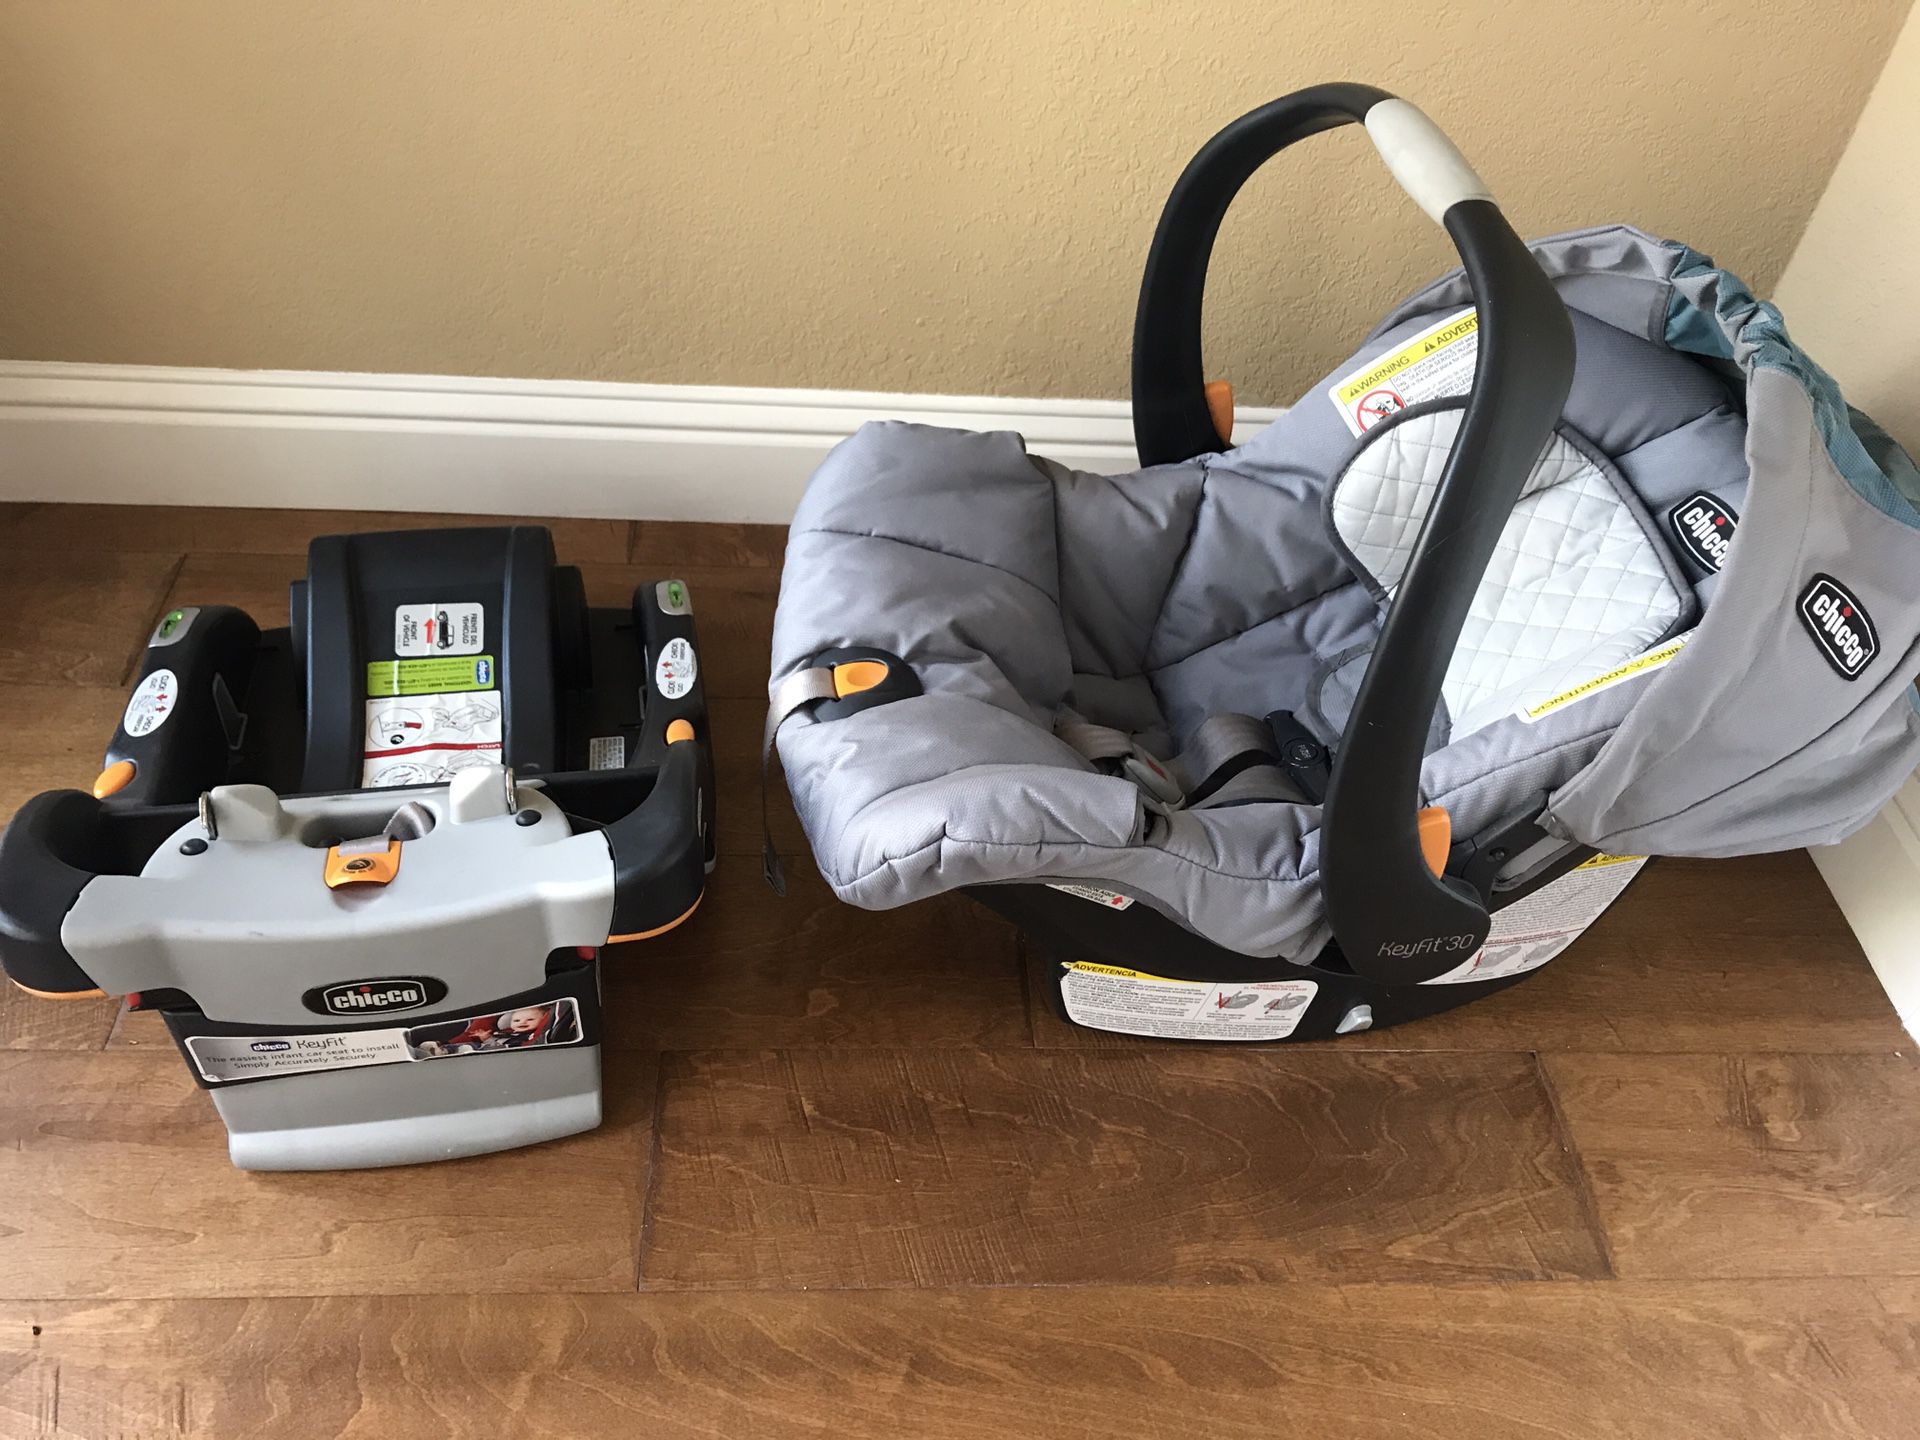 Chicco key fit 30 infant car seat and base in great condition. This is a high rated car seat one of the best available.